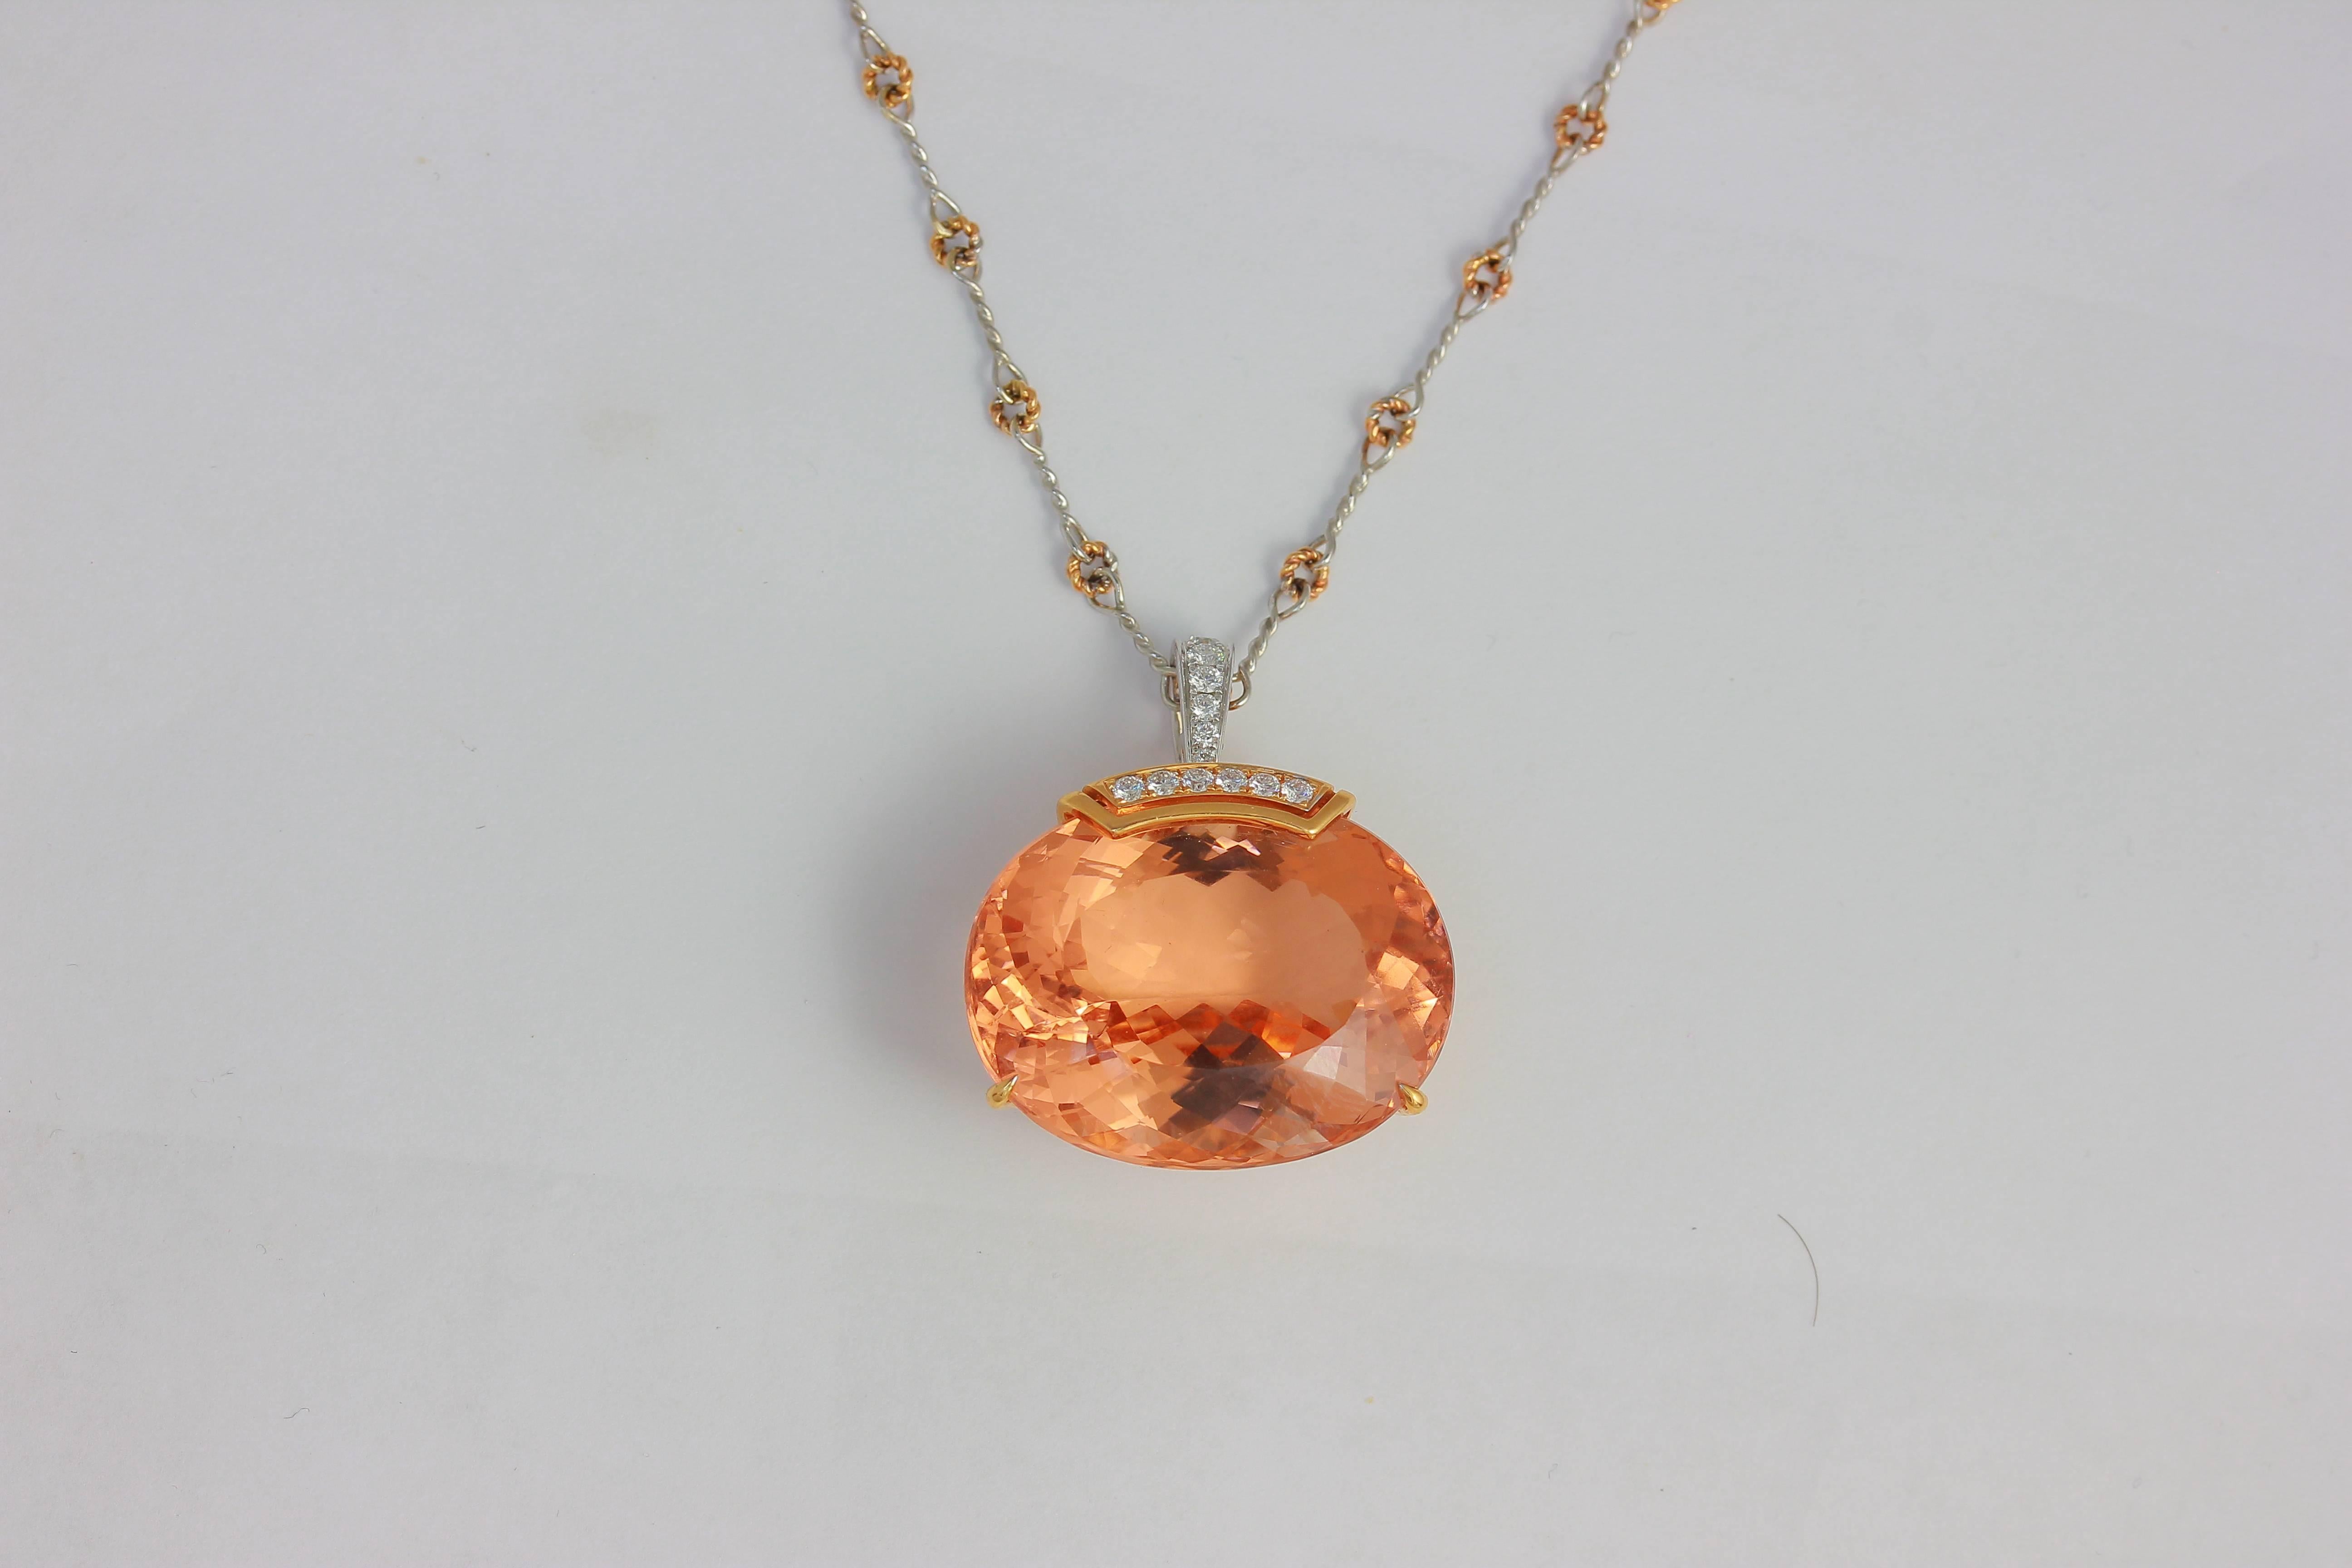 18K PWG OVAL MORGANITE AND DIAMOND ONE OF KIND PENDANT 
MORG 55.53 Carats, 16 DIA 0.36 Carats